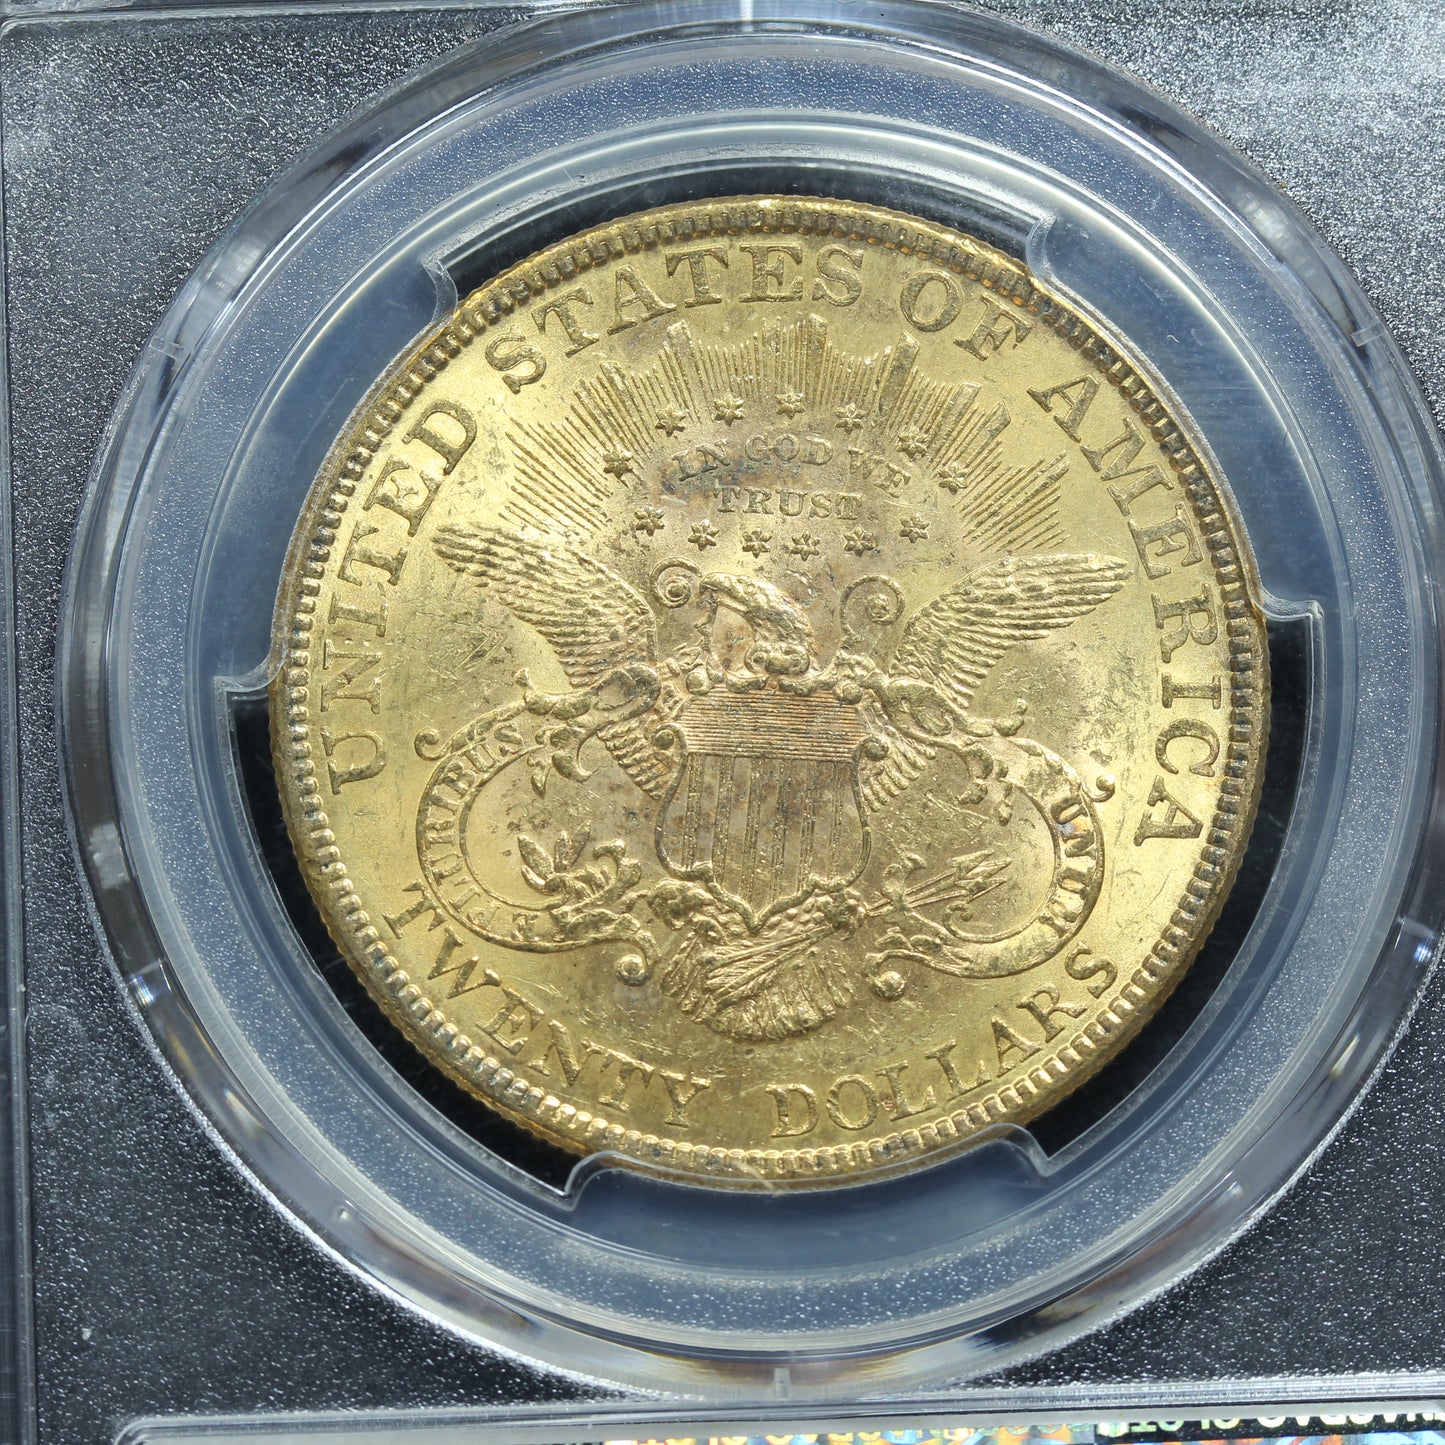 1878 $20 Gold Liberty Head Double Eagle Coin - PCGS MS 60